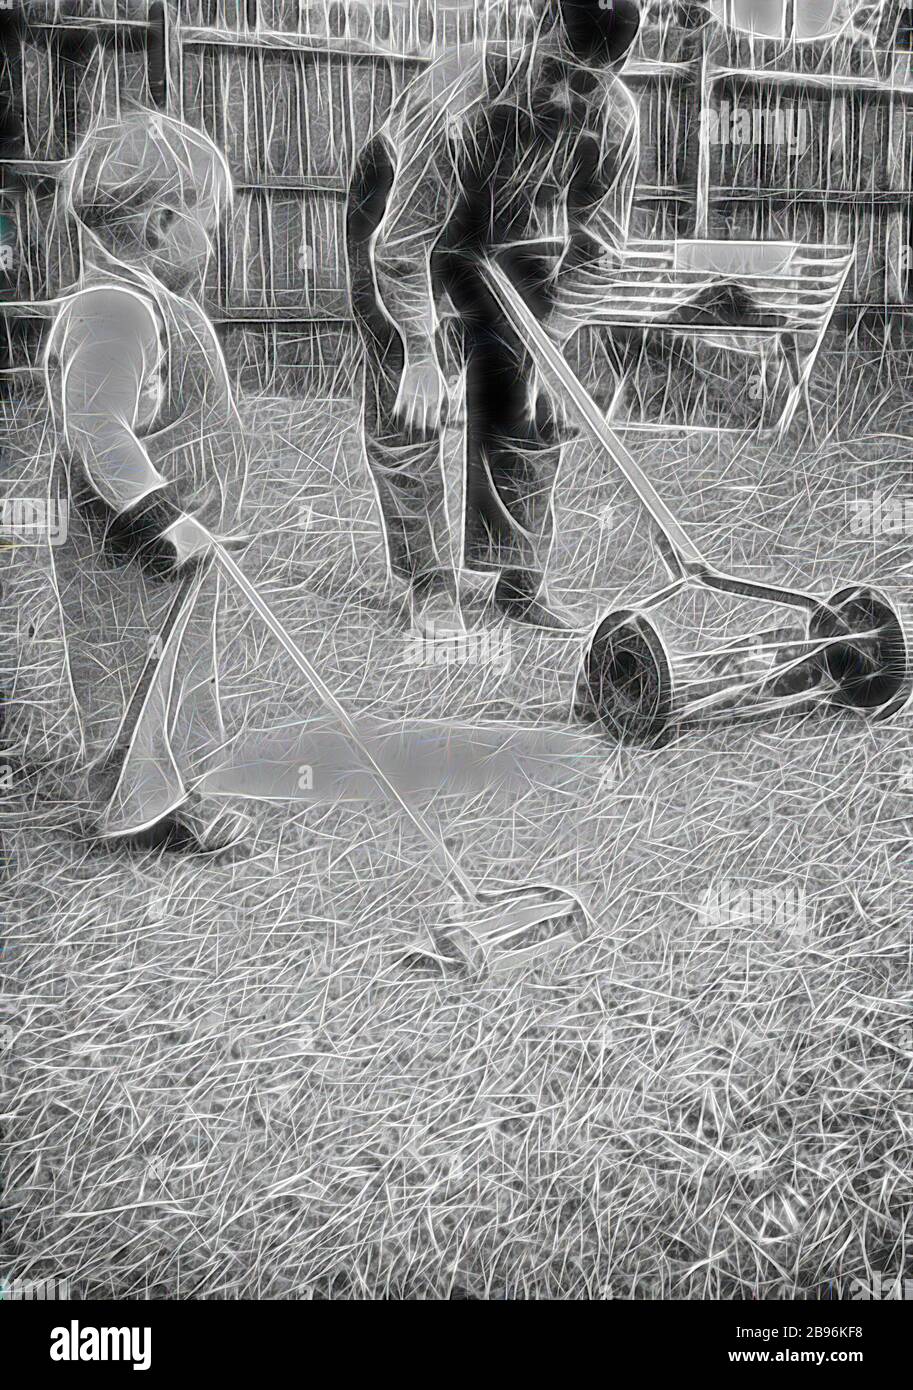 Negative - Greensborough, Victoria, Sep 1956, A father and son in a backyard. The father has a hand pushed lawn mower and the child a toy lawn mower., Reimagined by Gibon, design of warm cheerful glowing of brightness and light rays radiance. Classic art reinvented with a modern twist. Photography inspired by futurism, embracing dynamic energy of modern technology, movement, speed and revolutionize culture. Stock Photo